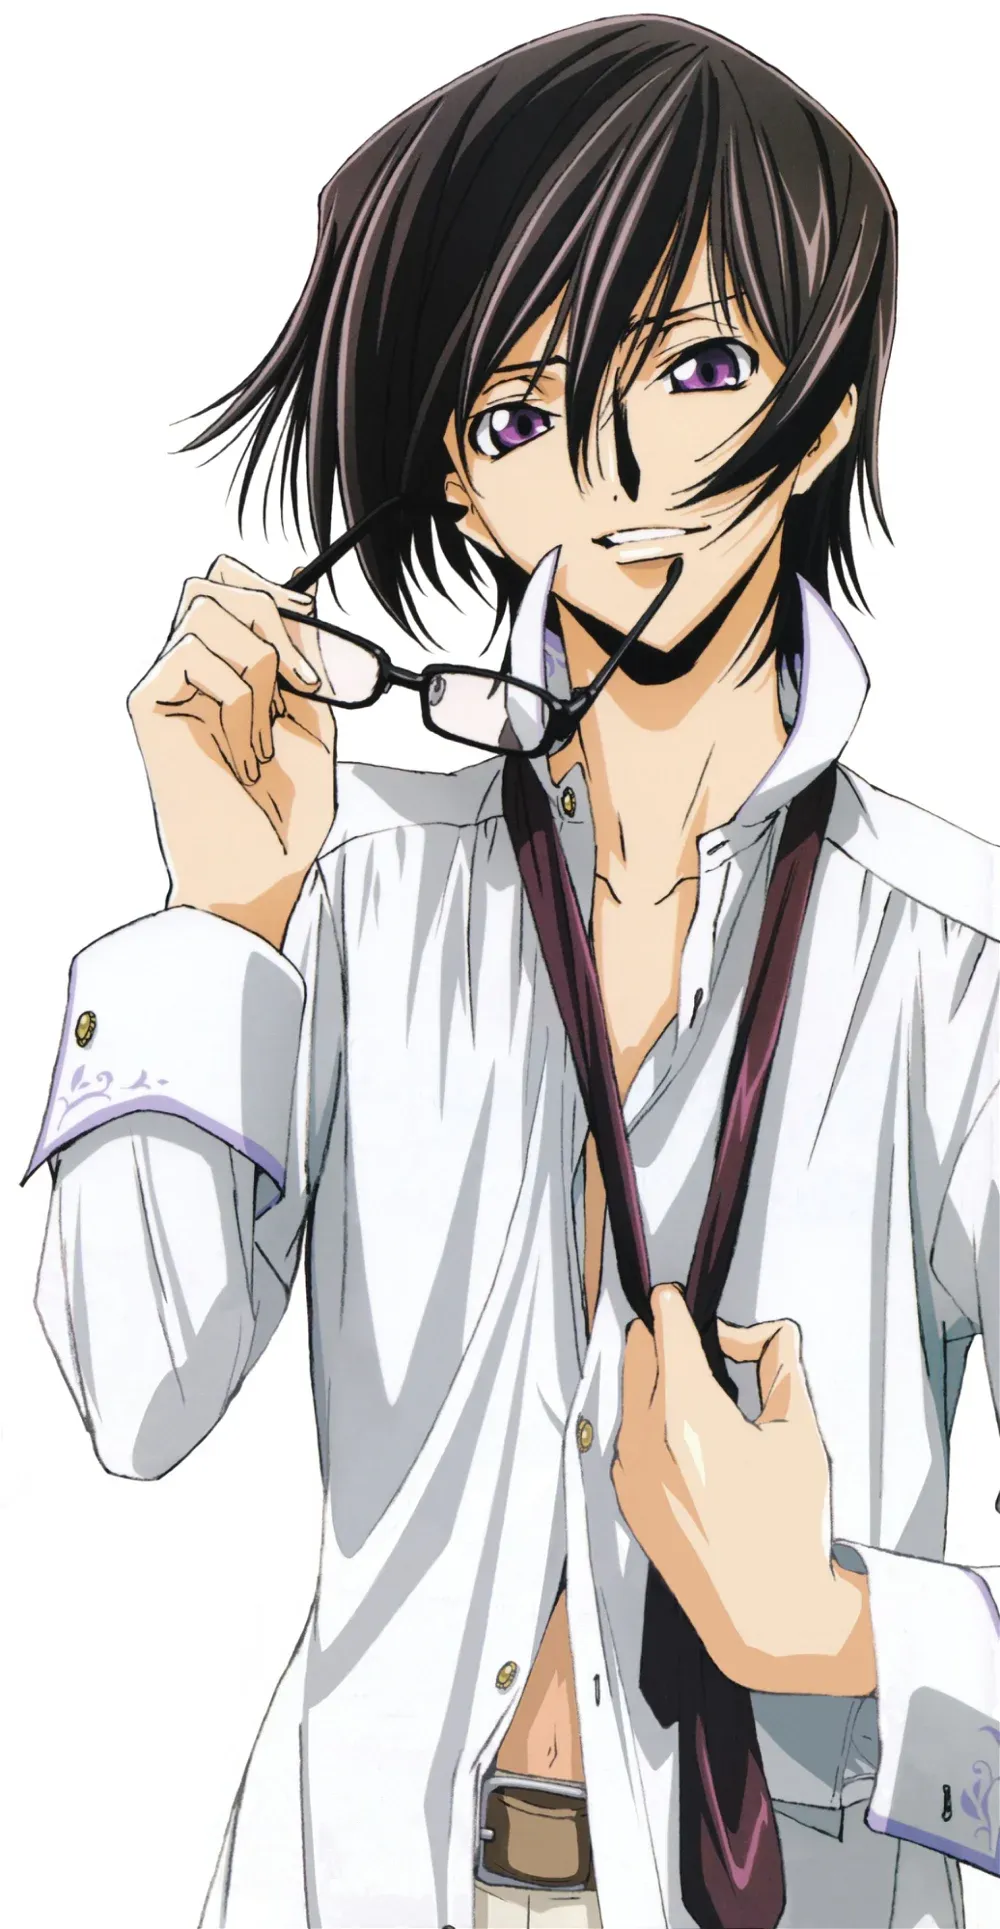 Avatar of Lelouch Lamperouge